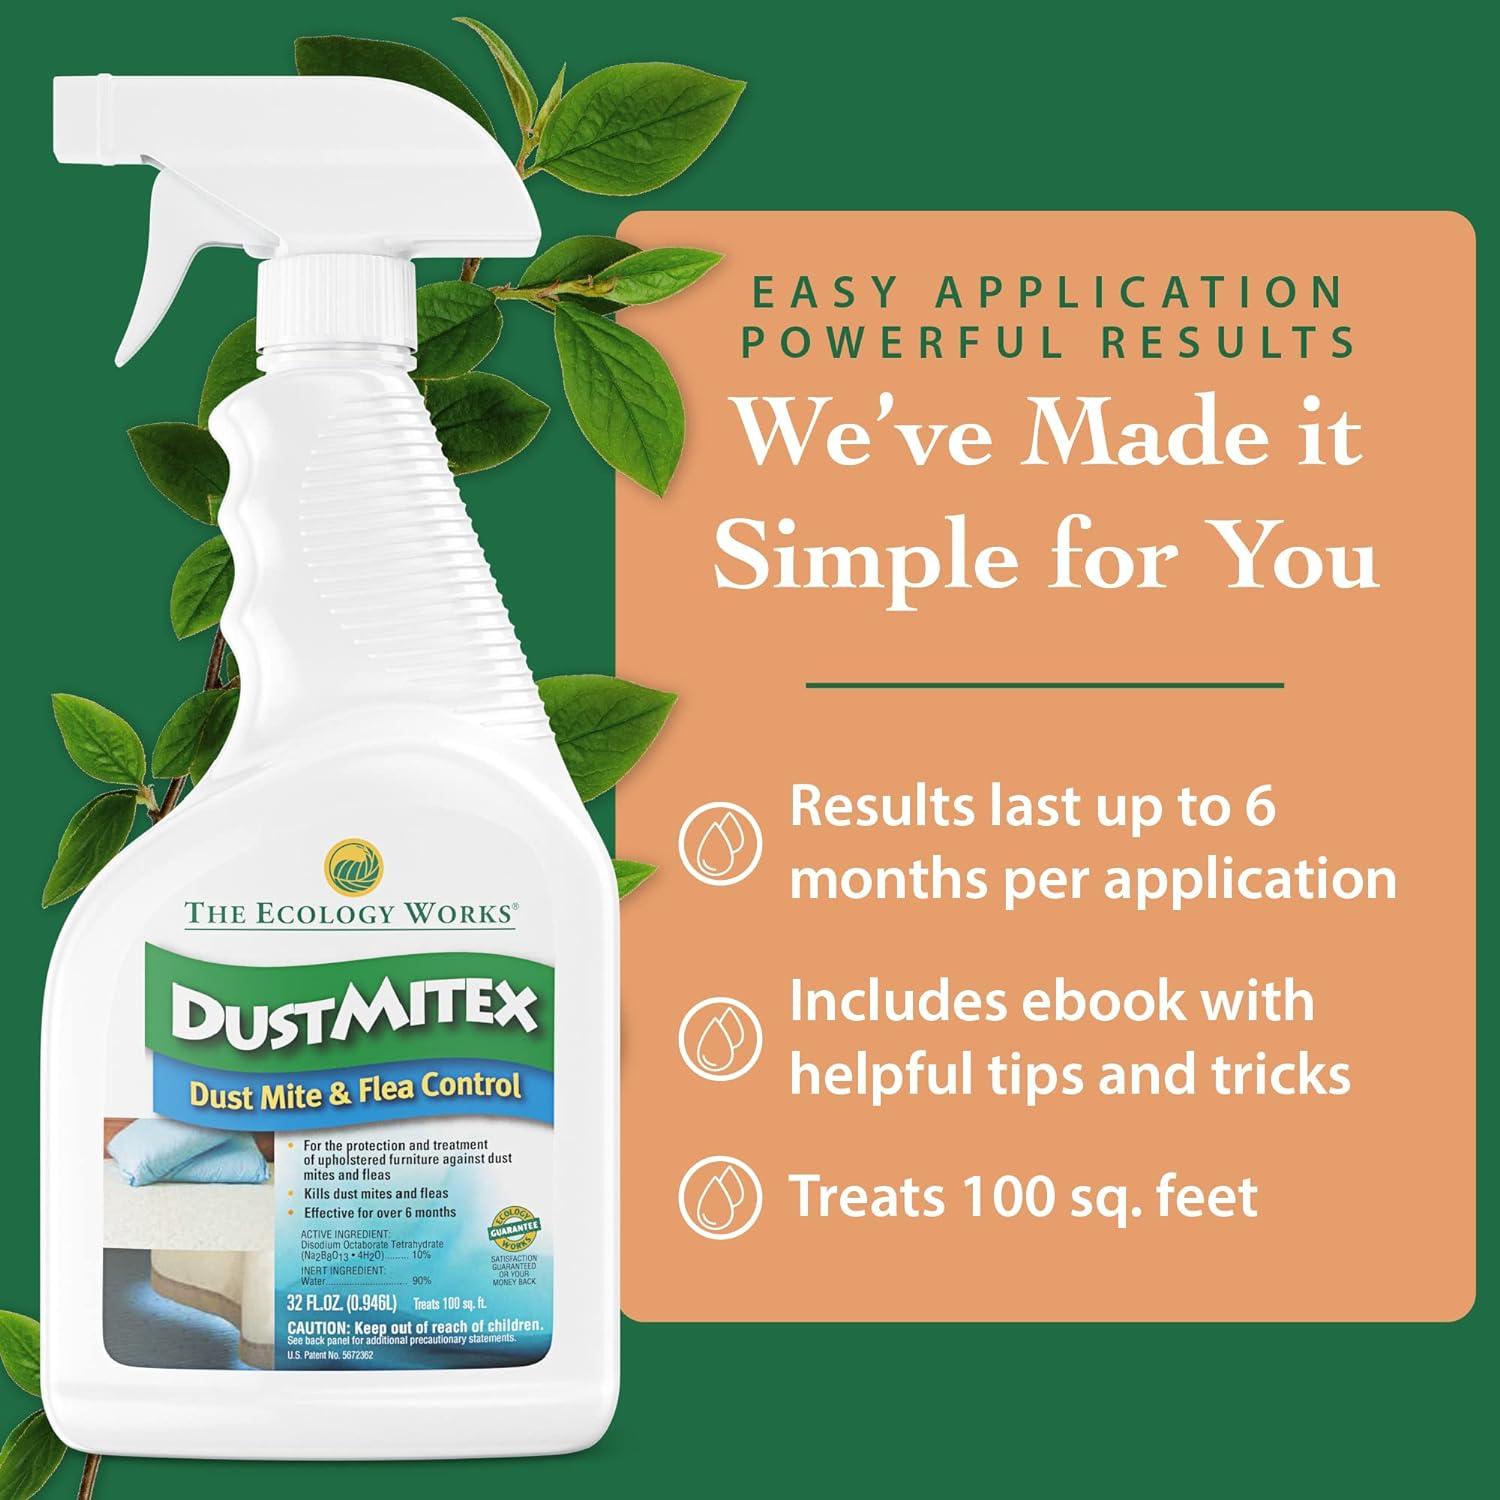 Dustmitex Dust Mite Spray Mites Remover Flea For Allergy Asthma Relief Allergies Cleaning In Home Bed Pet Bedding Furniture Anti Allergen